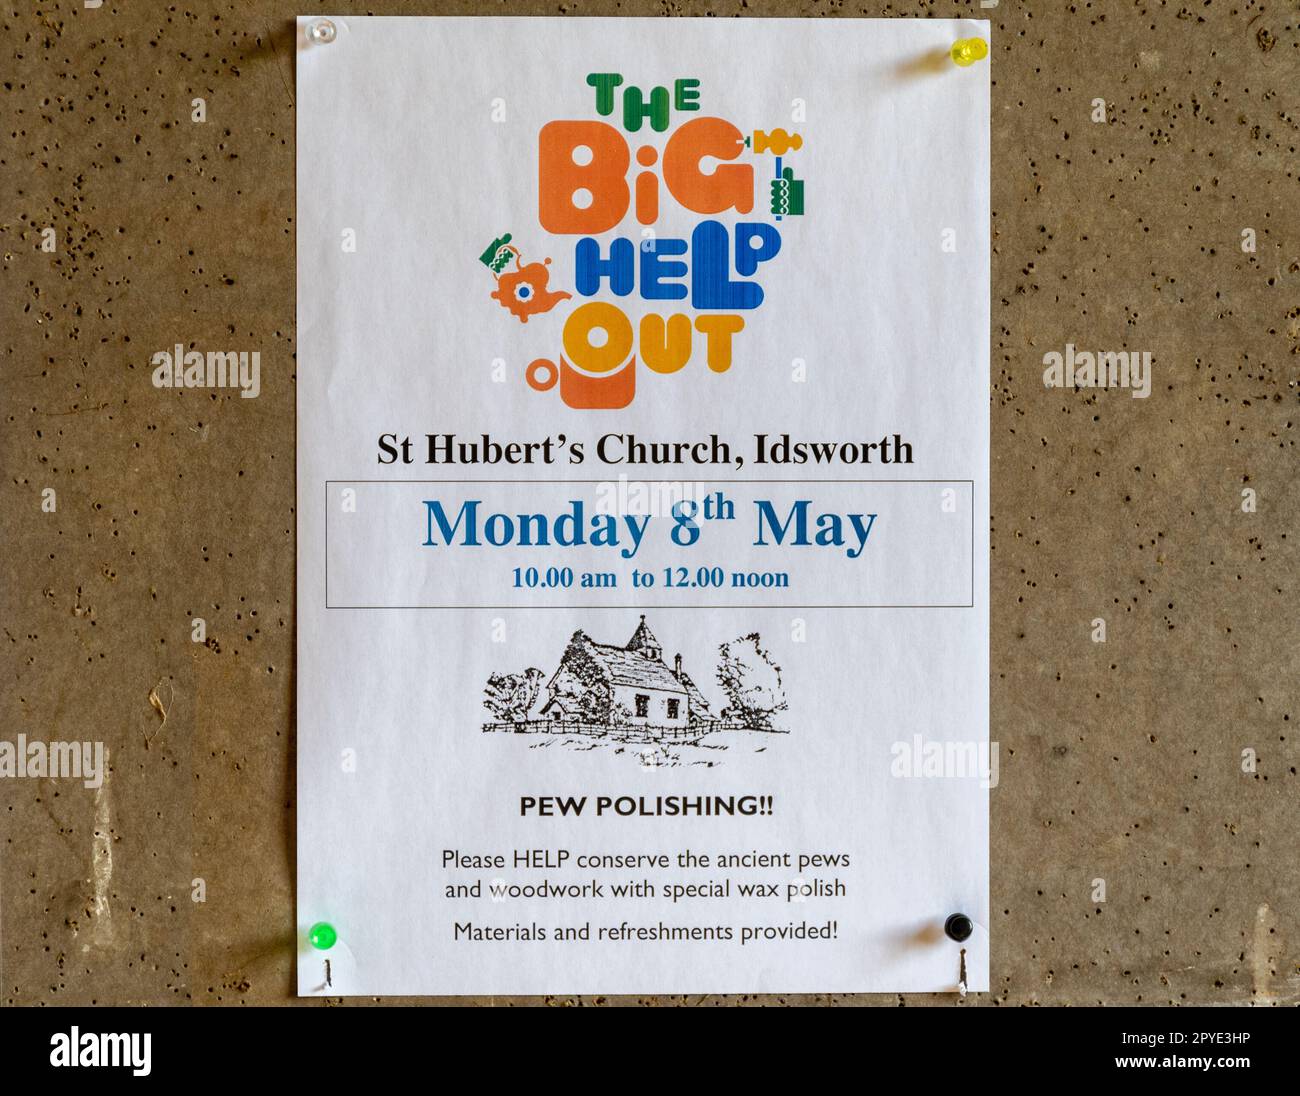 Idsworth, Hampshire, England, UK. Poster about The Big Help Out event on Monday 8th May on a church notice board. The Big Help Out is a national day of volunteering happening on 8 May, the Bank Holiday Monday of King Charles III Coronation weekend. The notice is asking for volunteers to help with church pew polishing. Stock Photo